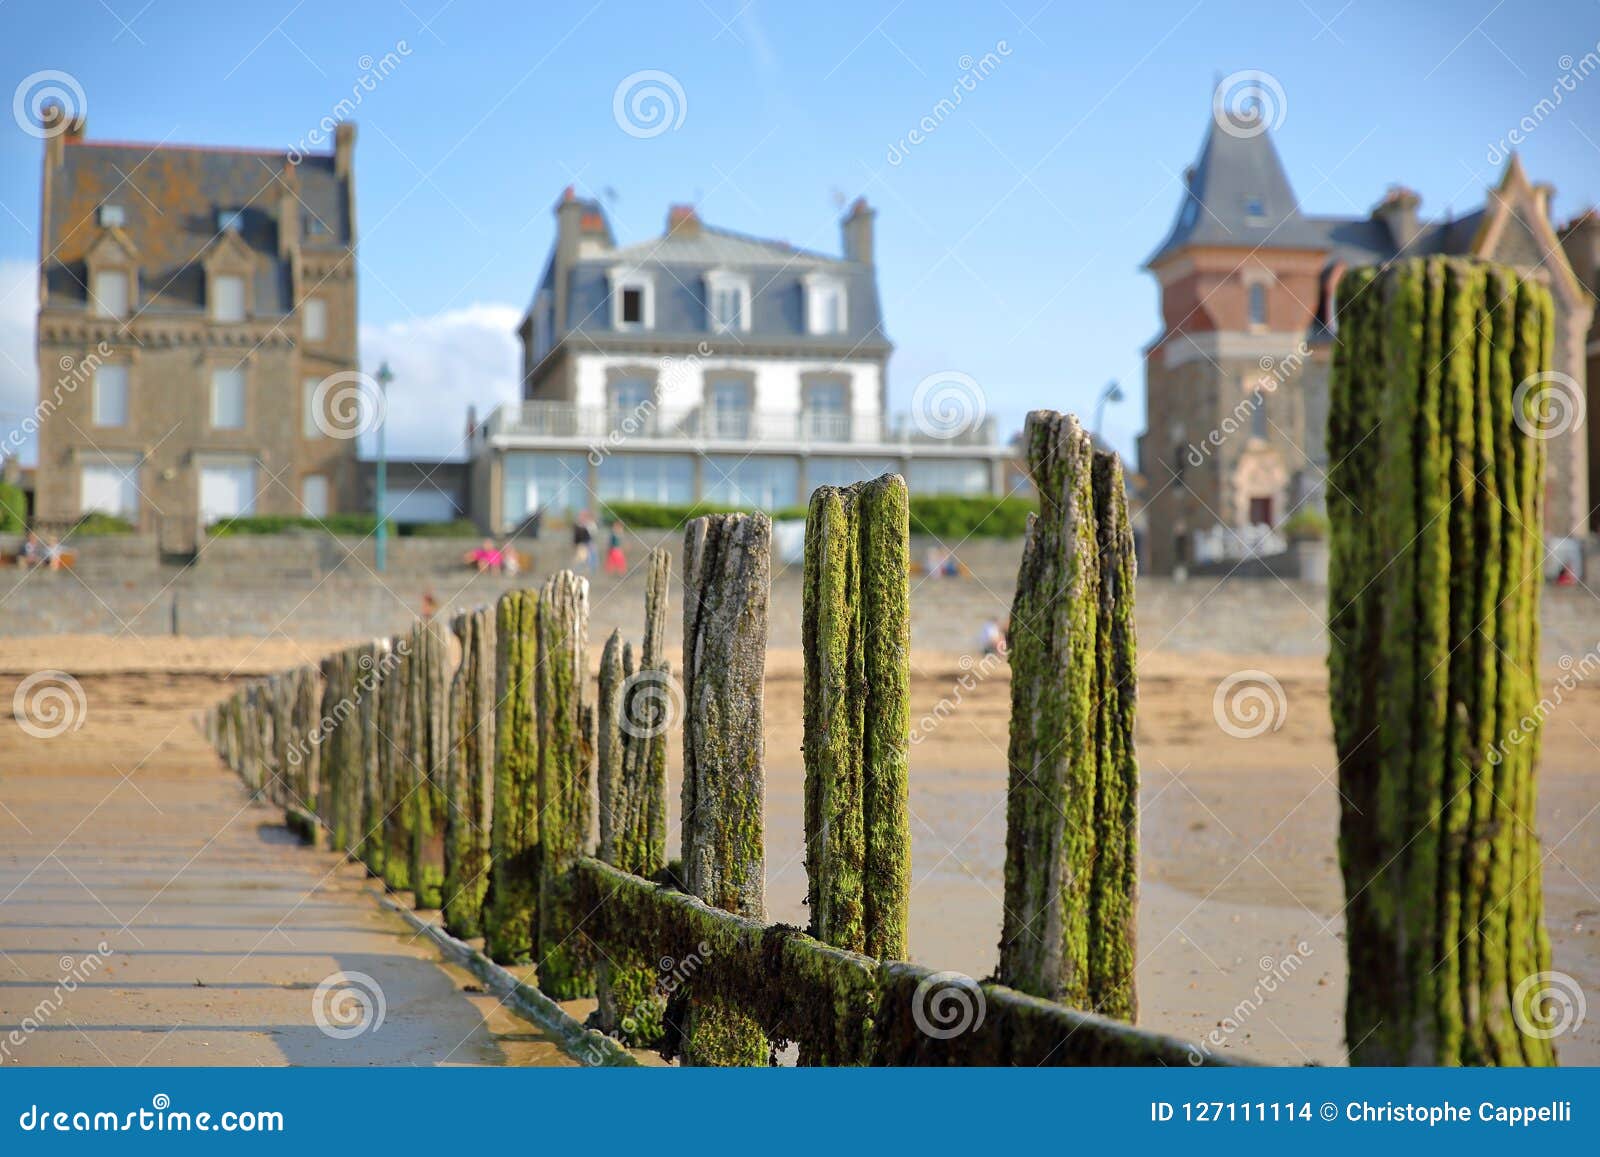 colorful breakwaters located on sillon beach with colorful house facades in the background, saint malo